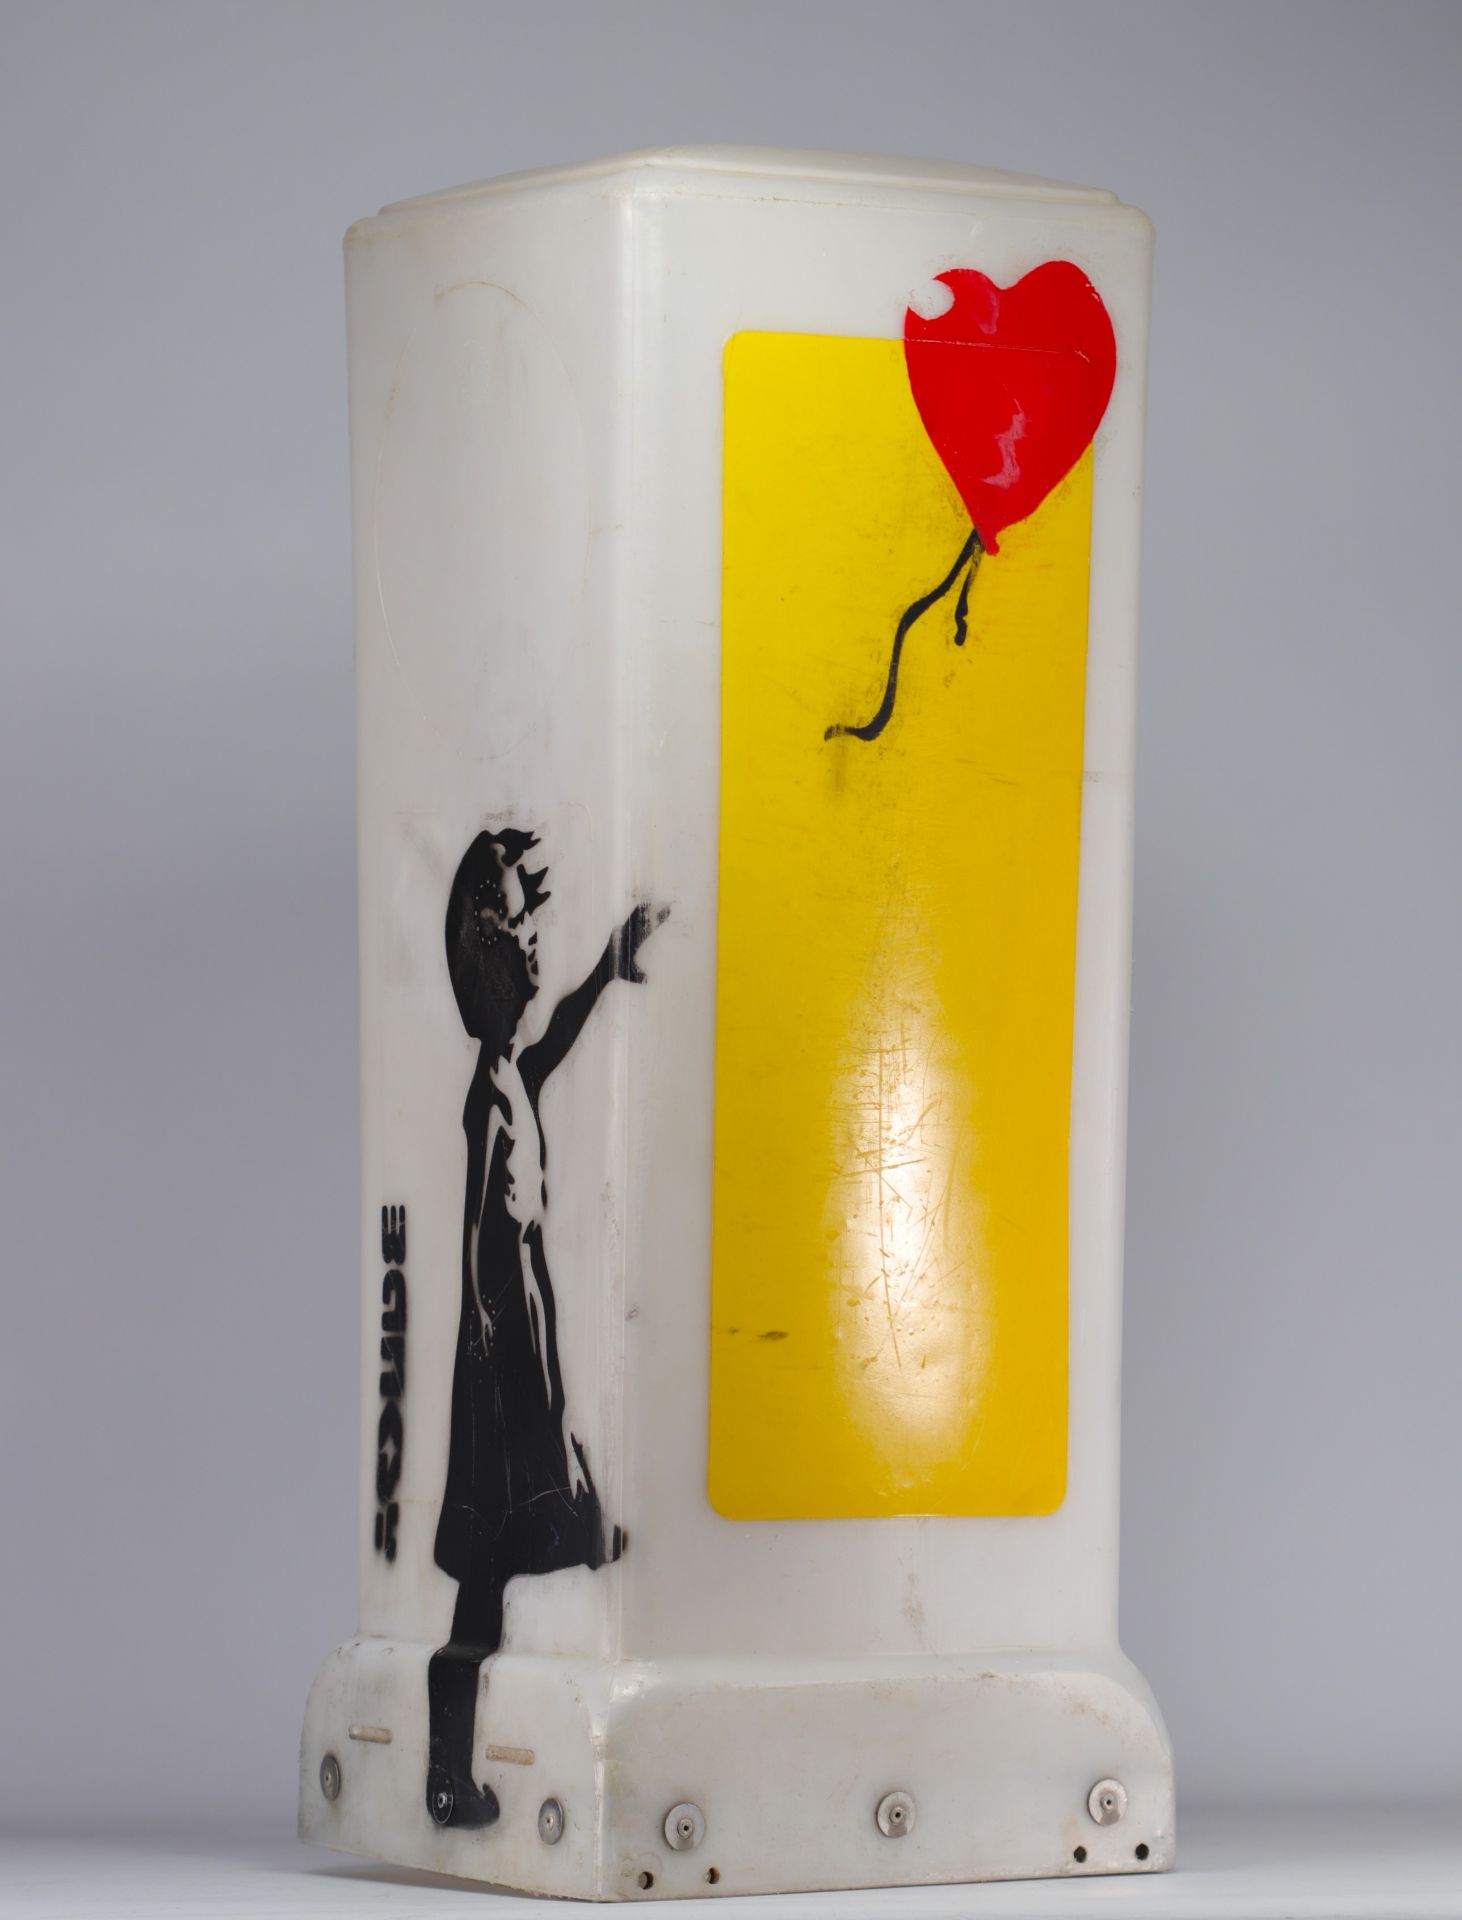 BANKSY (after) Spray and stencil on a plastic bollard from London signed "Banksy" from 2003